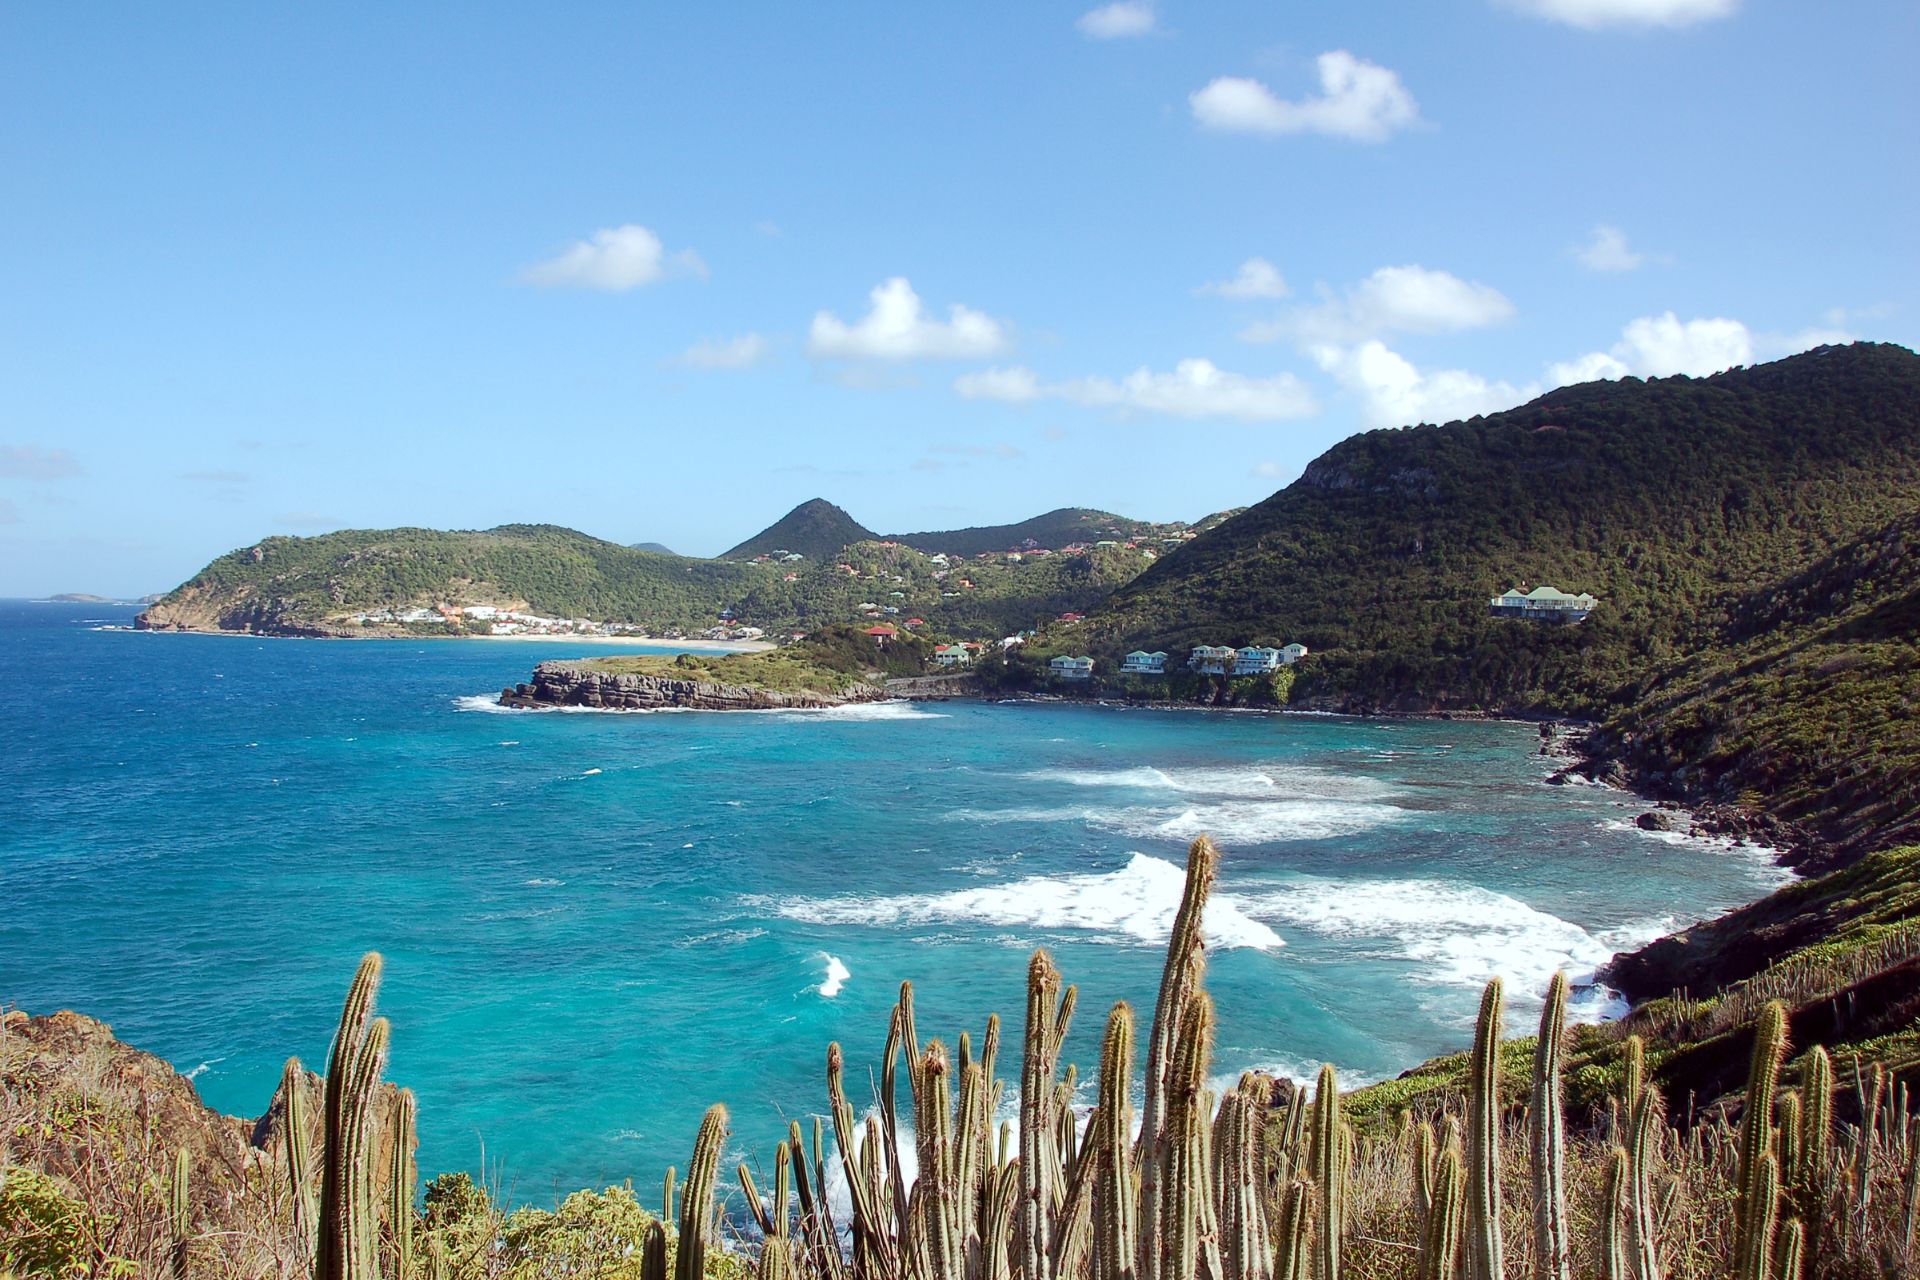 View of Colombier in St Barths, Caribbean